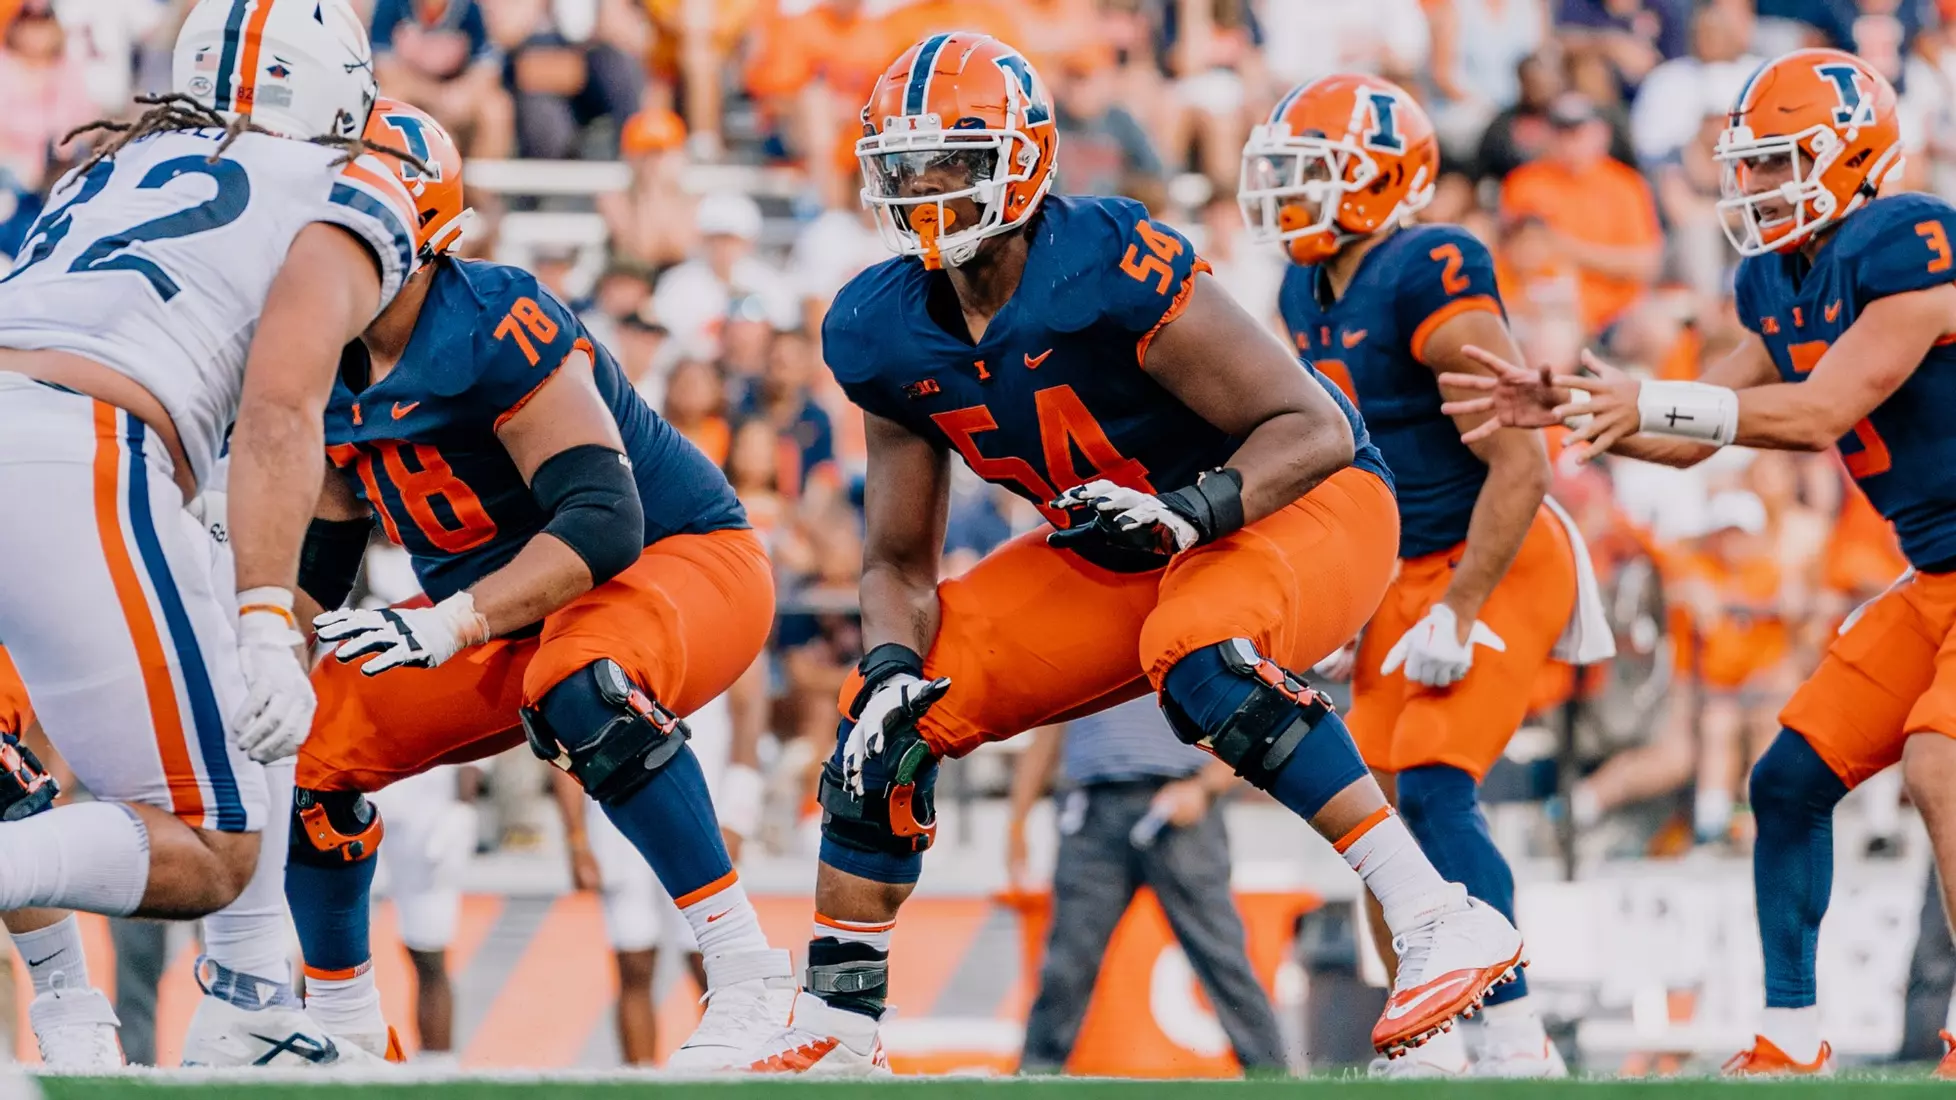 Julian Pearl showcases solid lateral agility and good use of hands on the Illinois offensive line. Hula Bowl scout Justyce Gordon breaks down Pearl as an NFL Prospect in his report